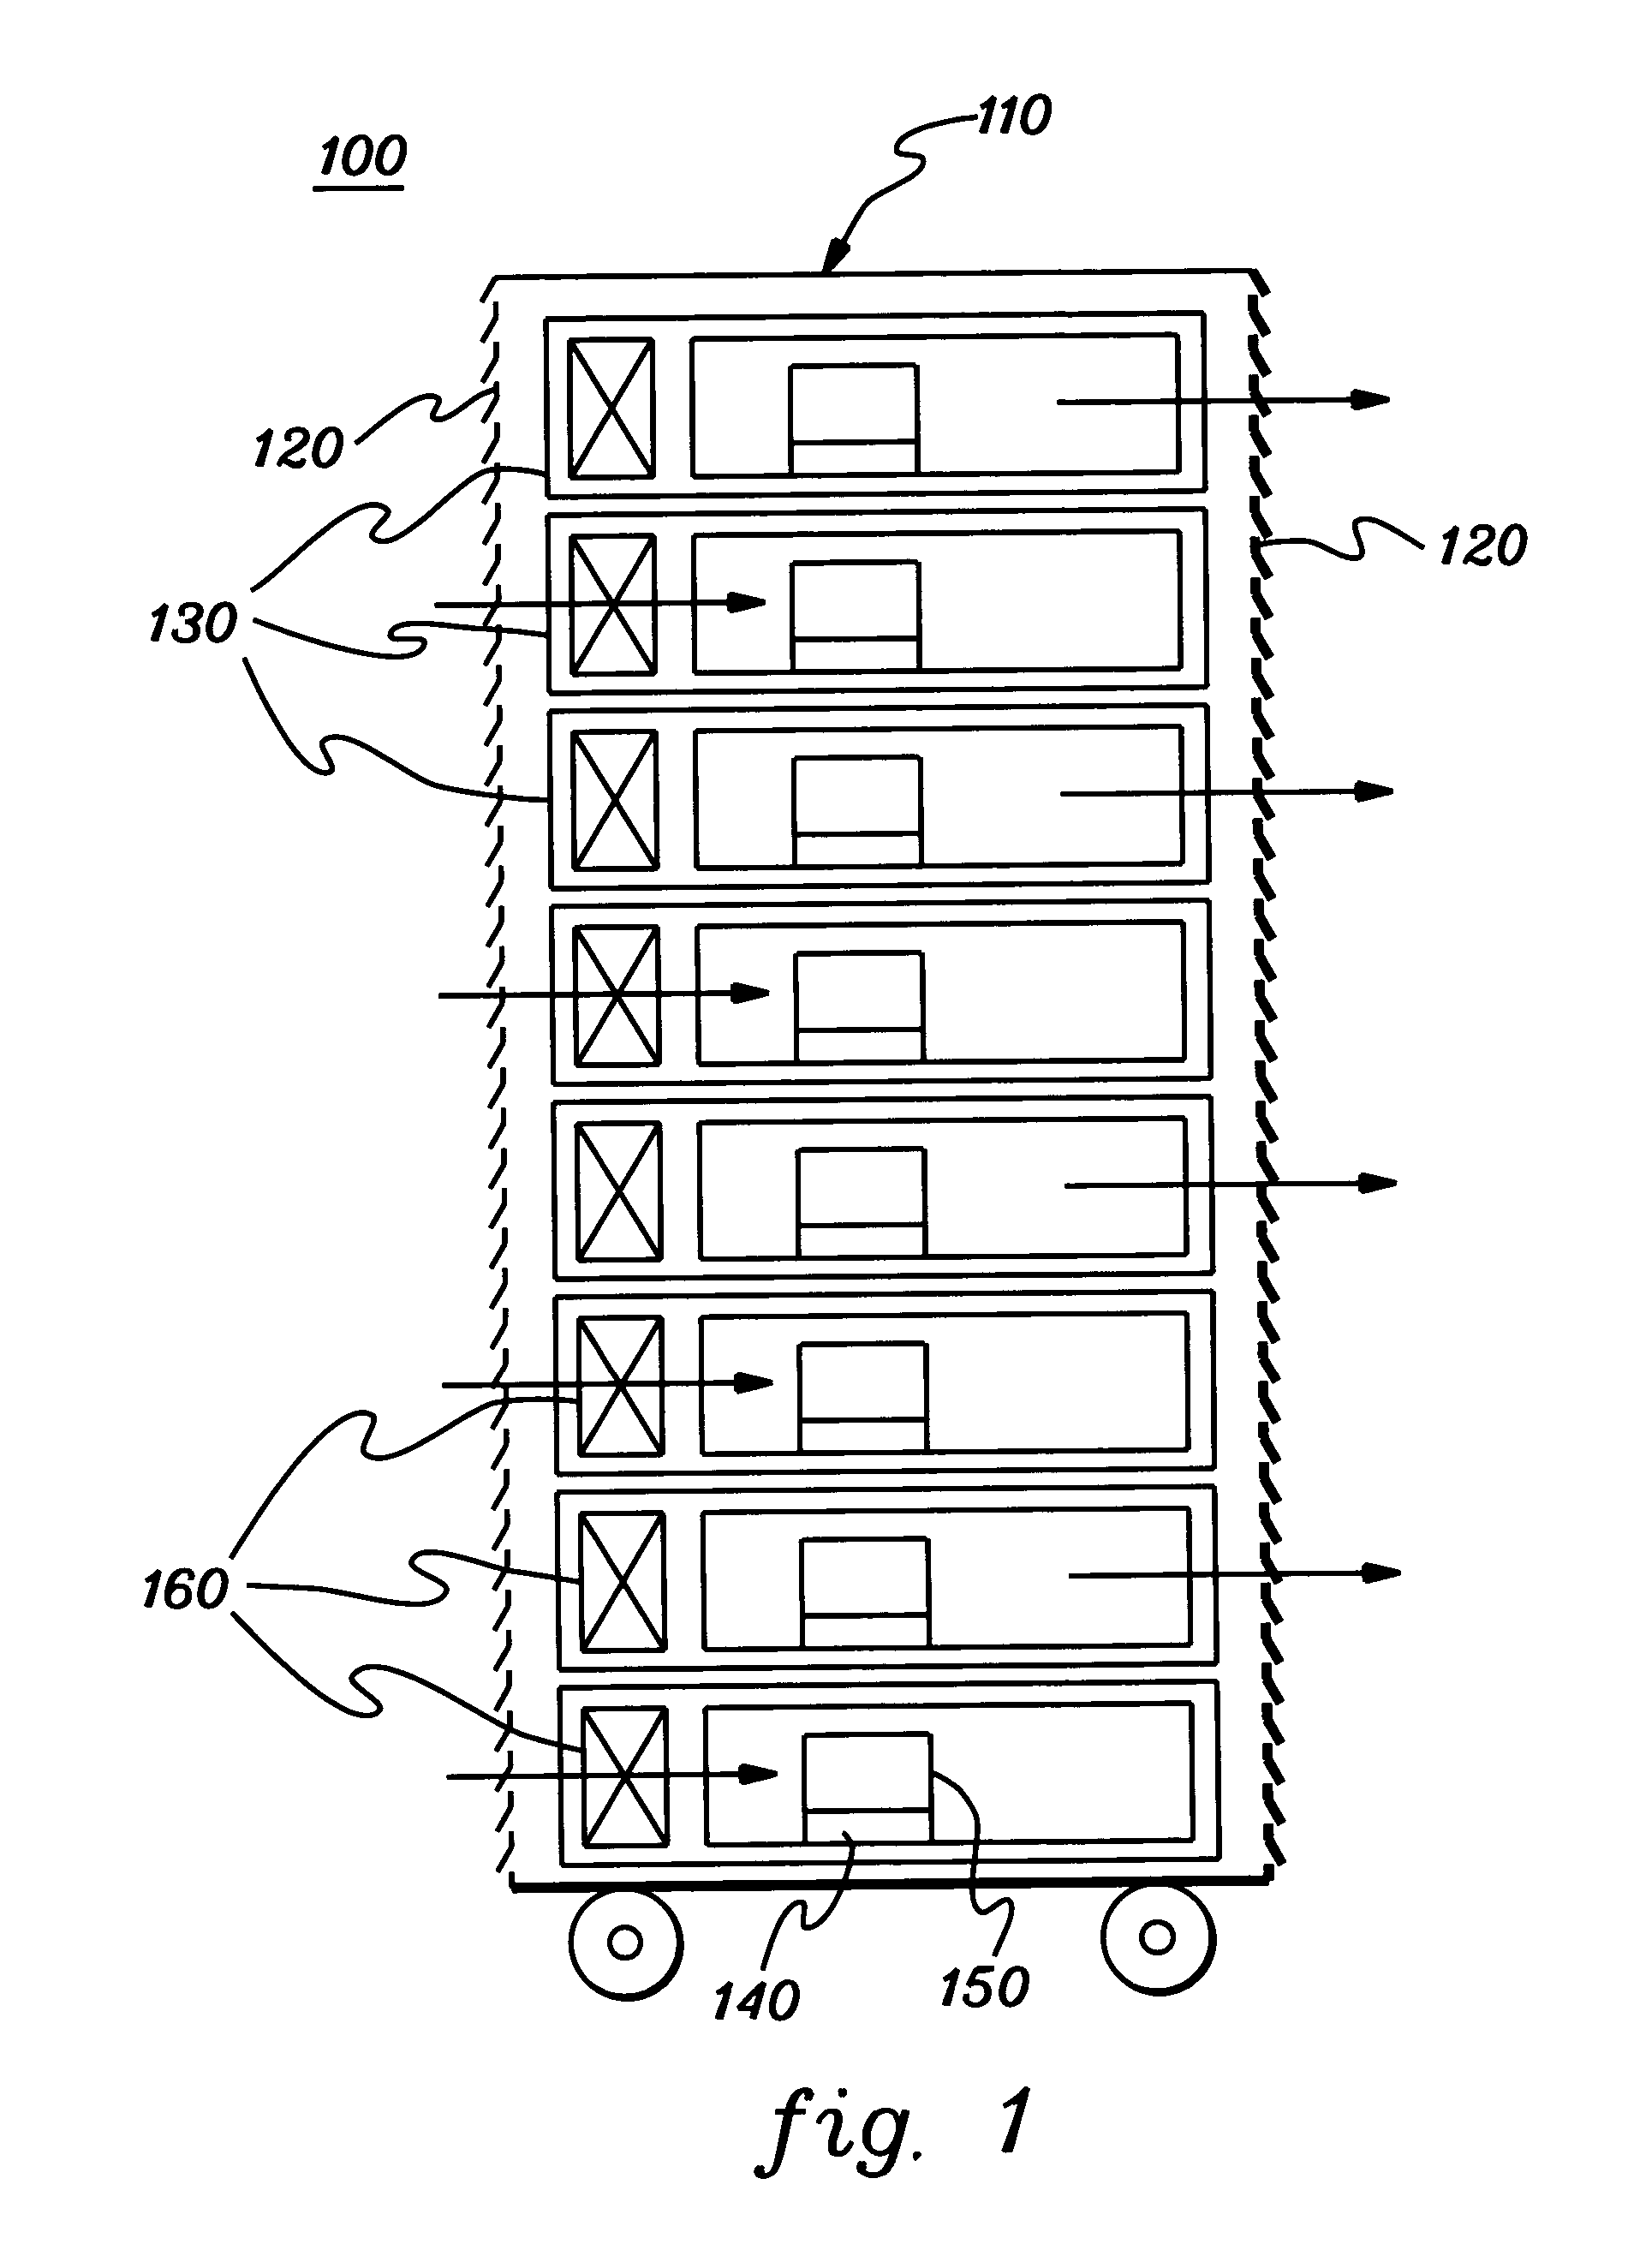 Thermal dissipation assembly and fabrication method for electronics drawer of a multiple-drawer electronics rack